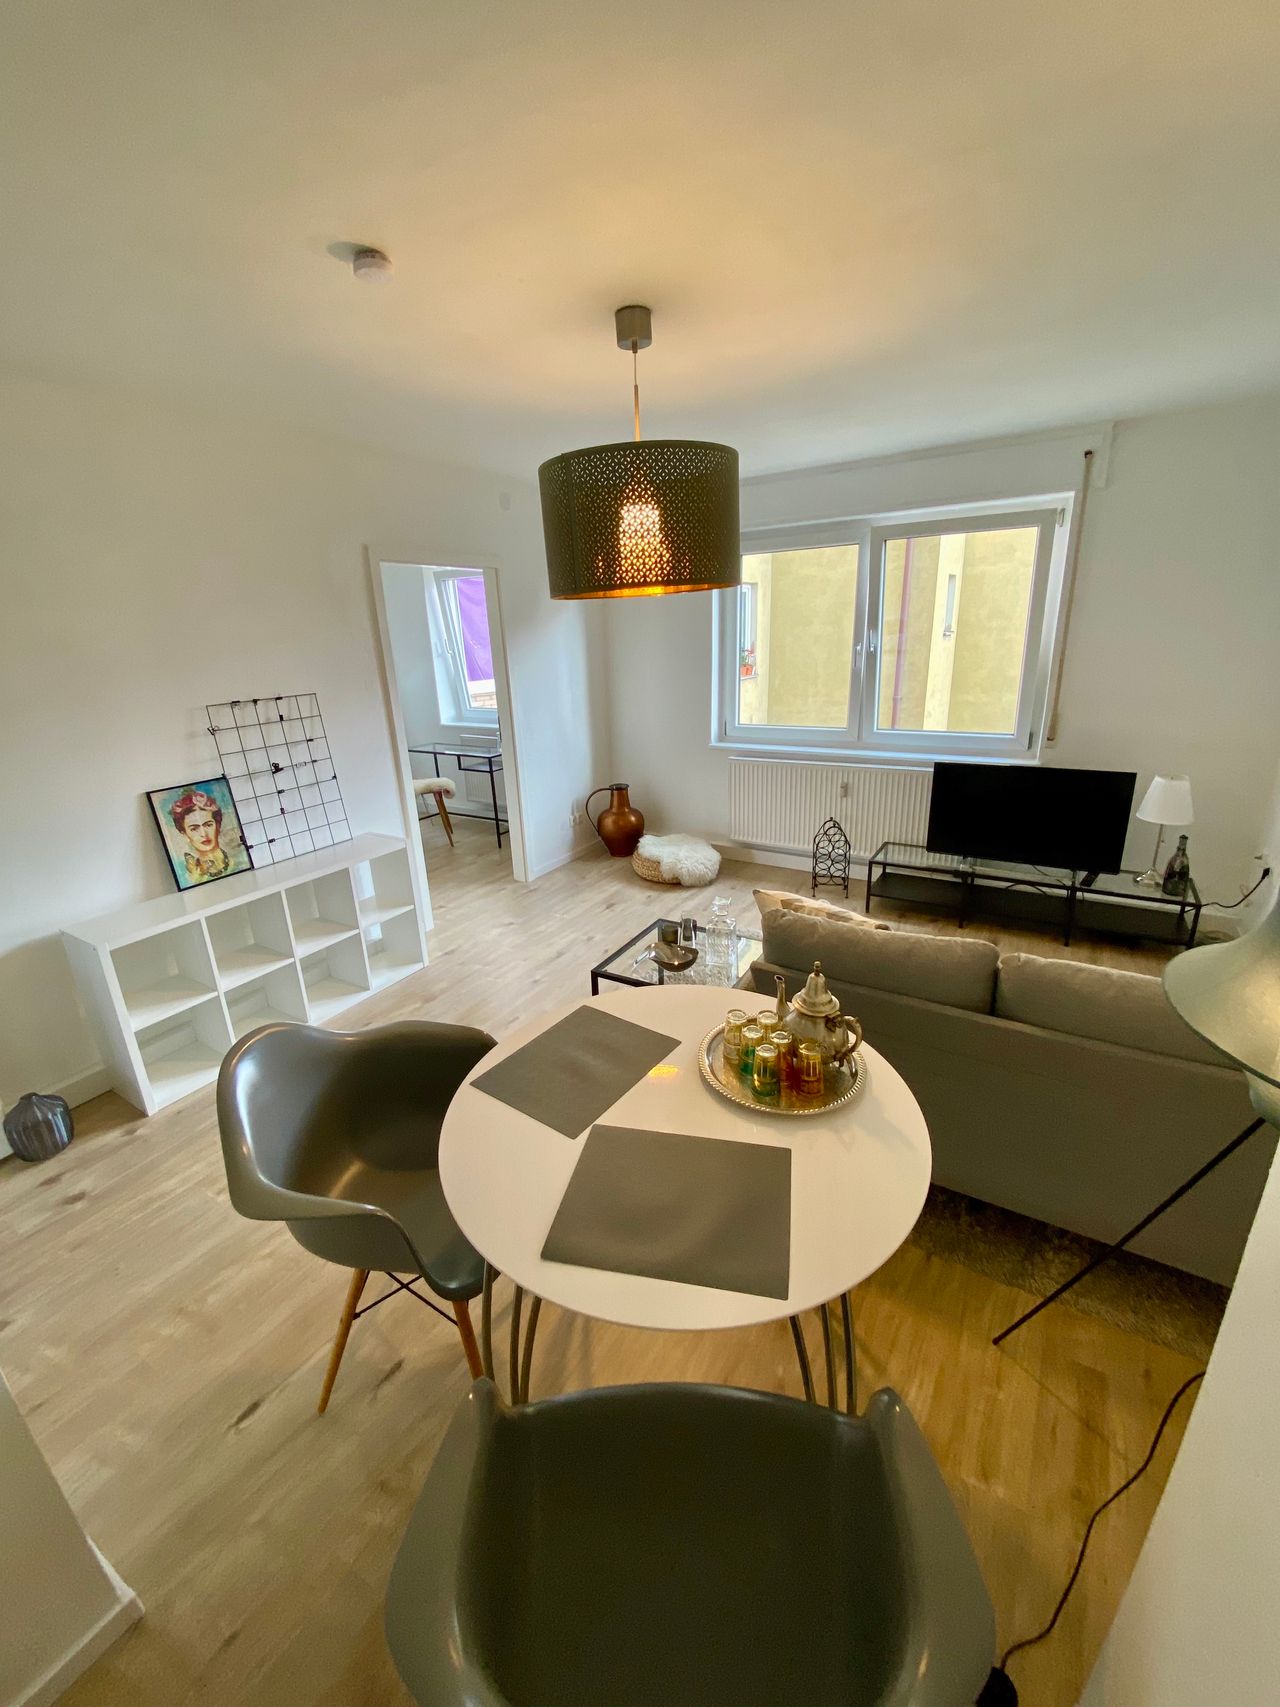 All-inclusive: Fully furnished apartment in Nuremberg city centre